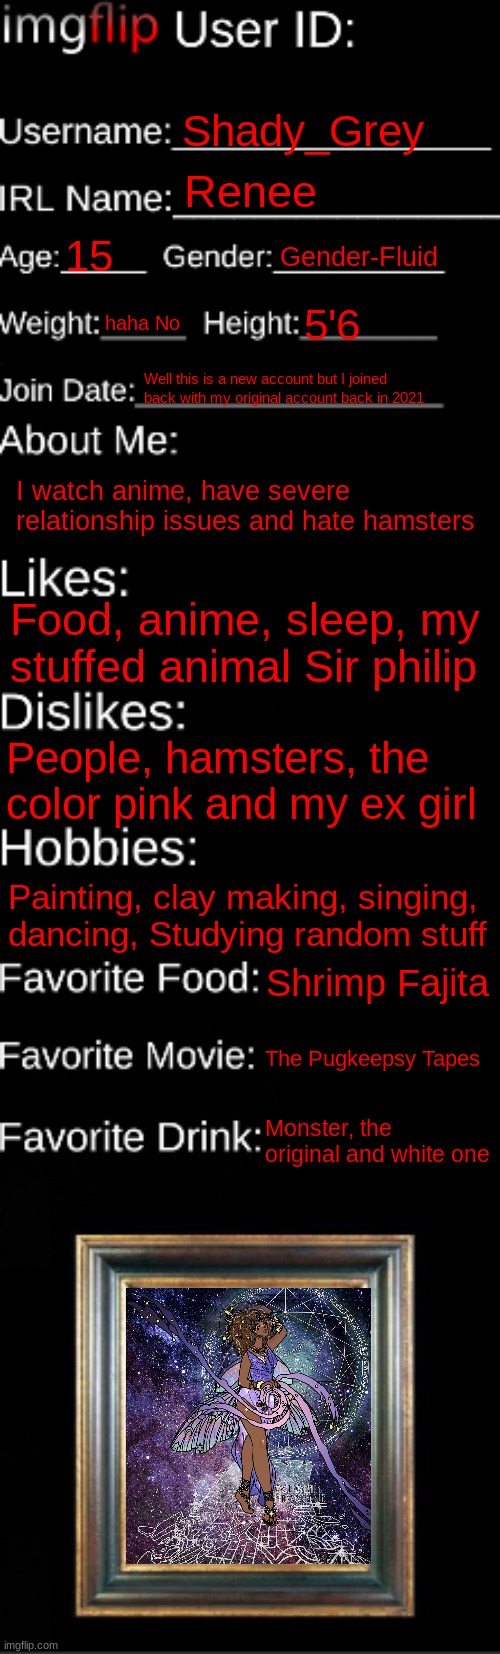 imgflip ID Card | Shady_Grey; Renee; 15; Gender-Fluid; haha No; 5'6; Well this is a new account but I joined back with my original account back in 2021; I watch anime, have severe relationship issues and hate hamsters; Food, anime, sleep, my stuffed animal Sir philip; People, hamsters, the color pink and my ex girl; Painting, clay making, singing, dancing, Studying random stuff; Shrimp Fajita; The Pugkeepsy Tapes; Monster, the original and white one | image tagged in imgflip id card | made w/ Imgflip meme maker